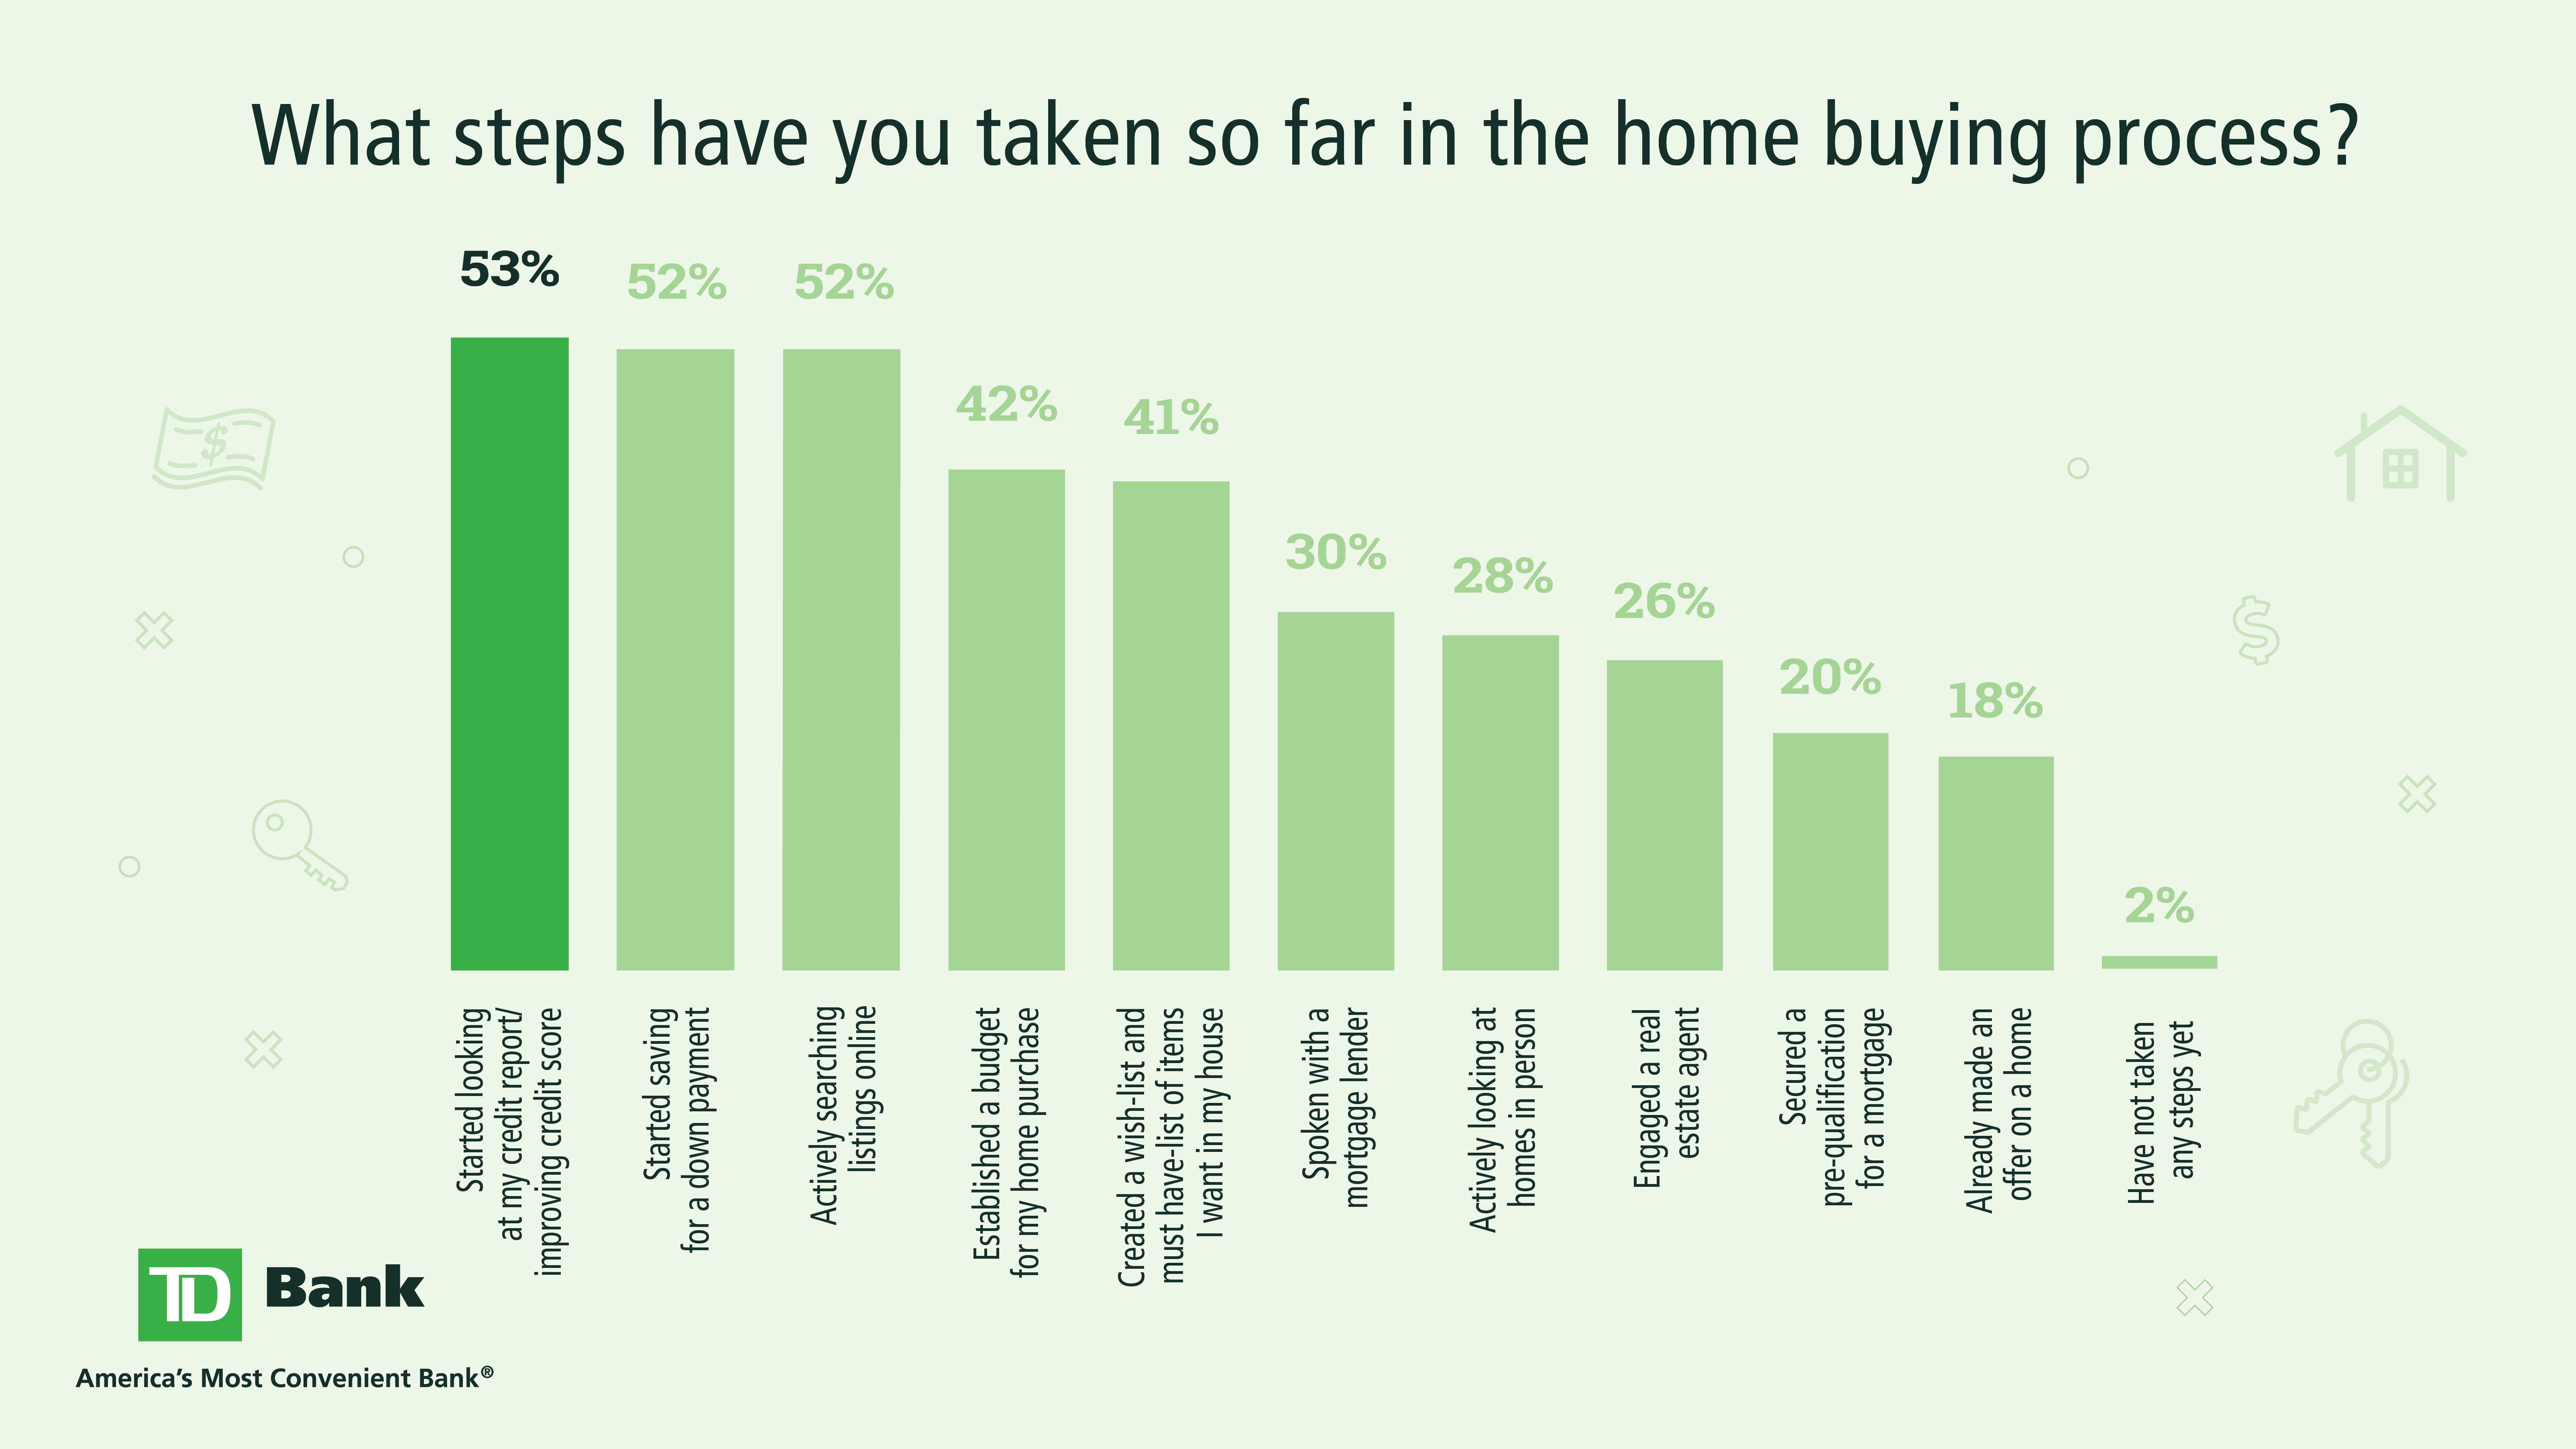 Three out of four Millennials believe that being a first-time homebuyer is an overwhelming process